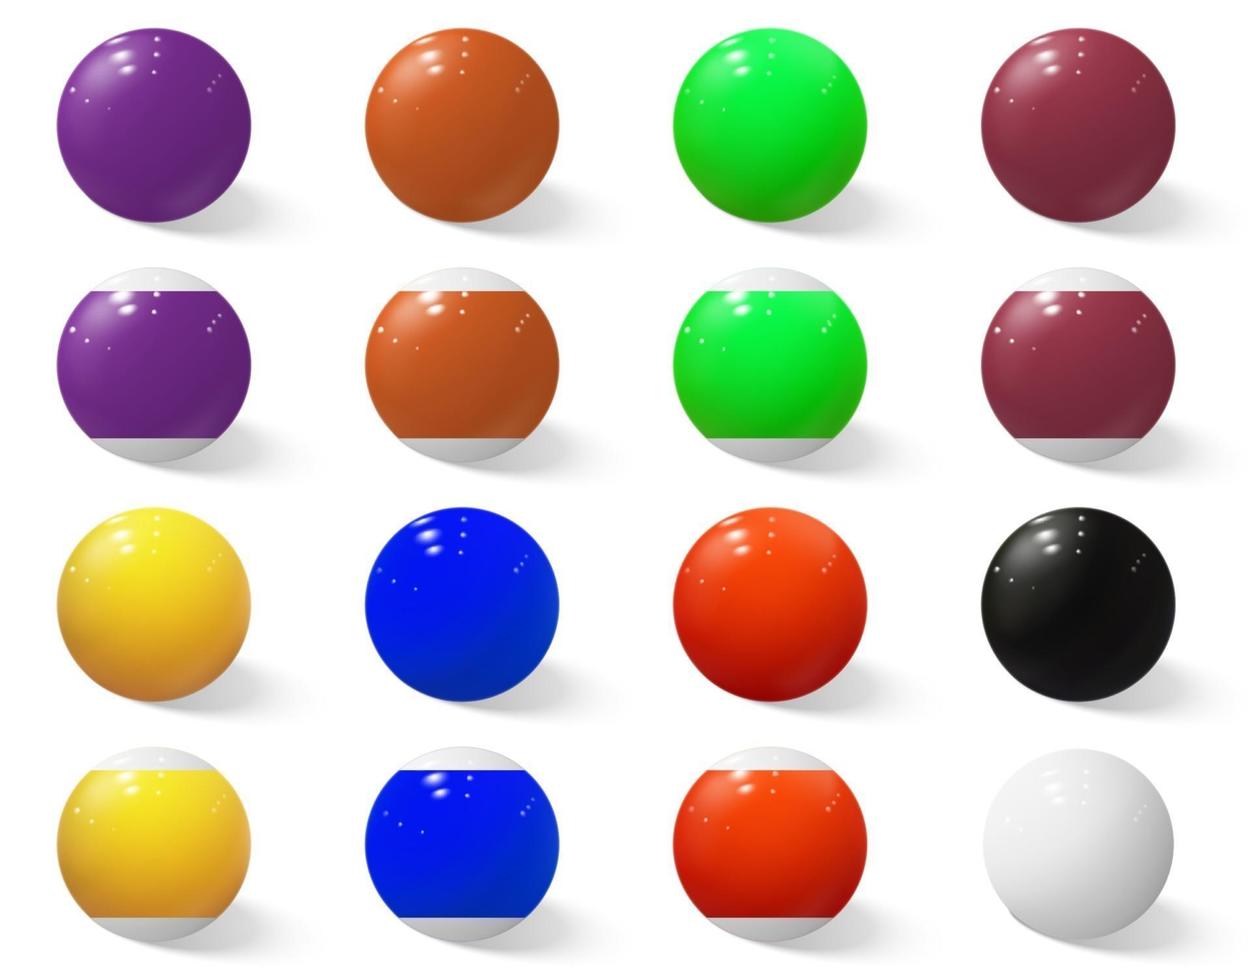 Billiard, pool or snooker balls without numbers. vector